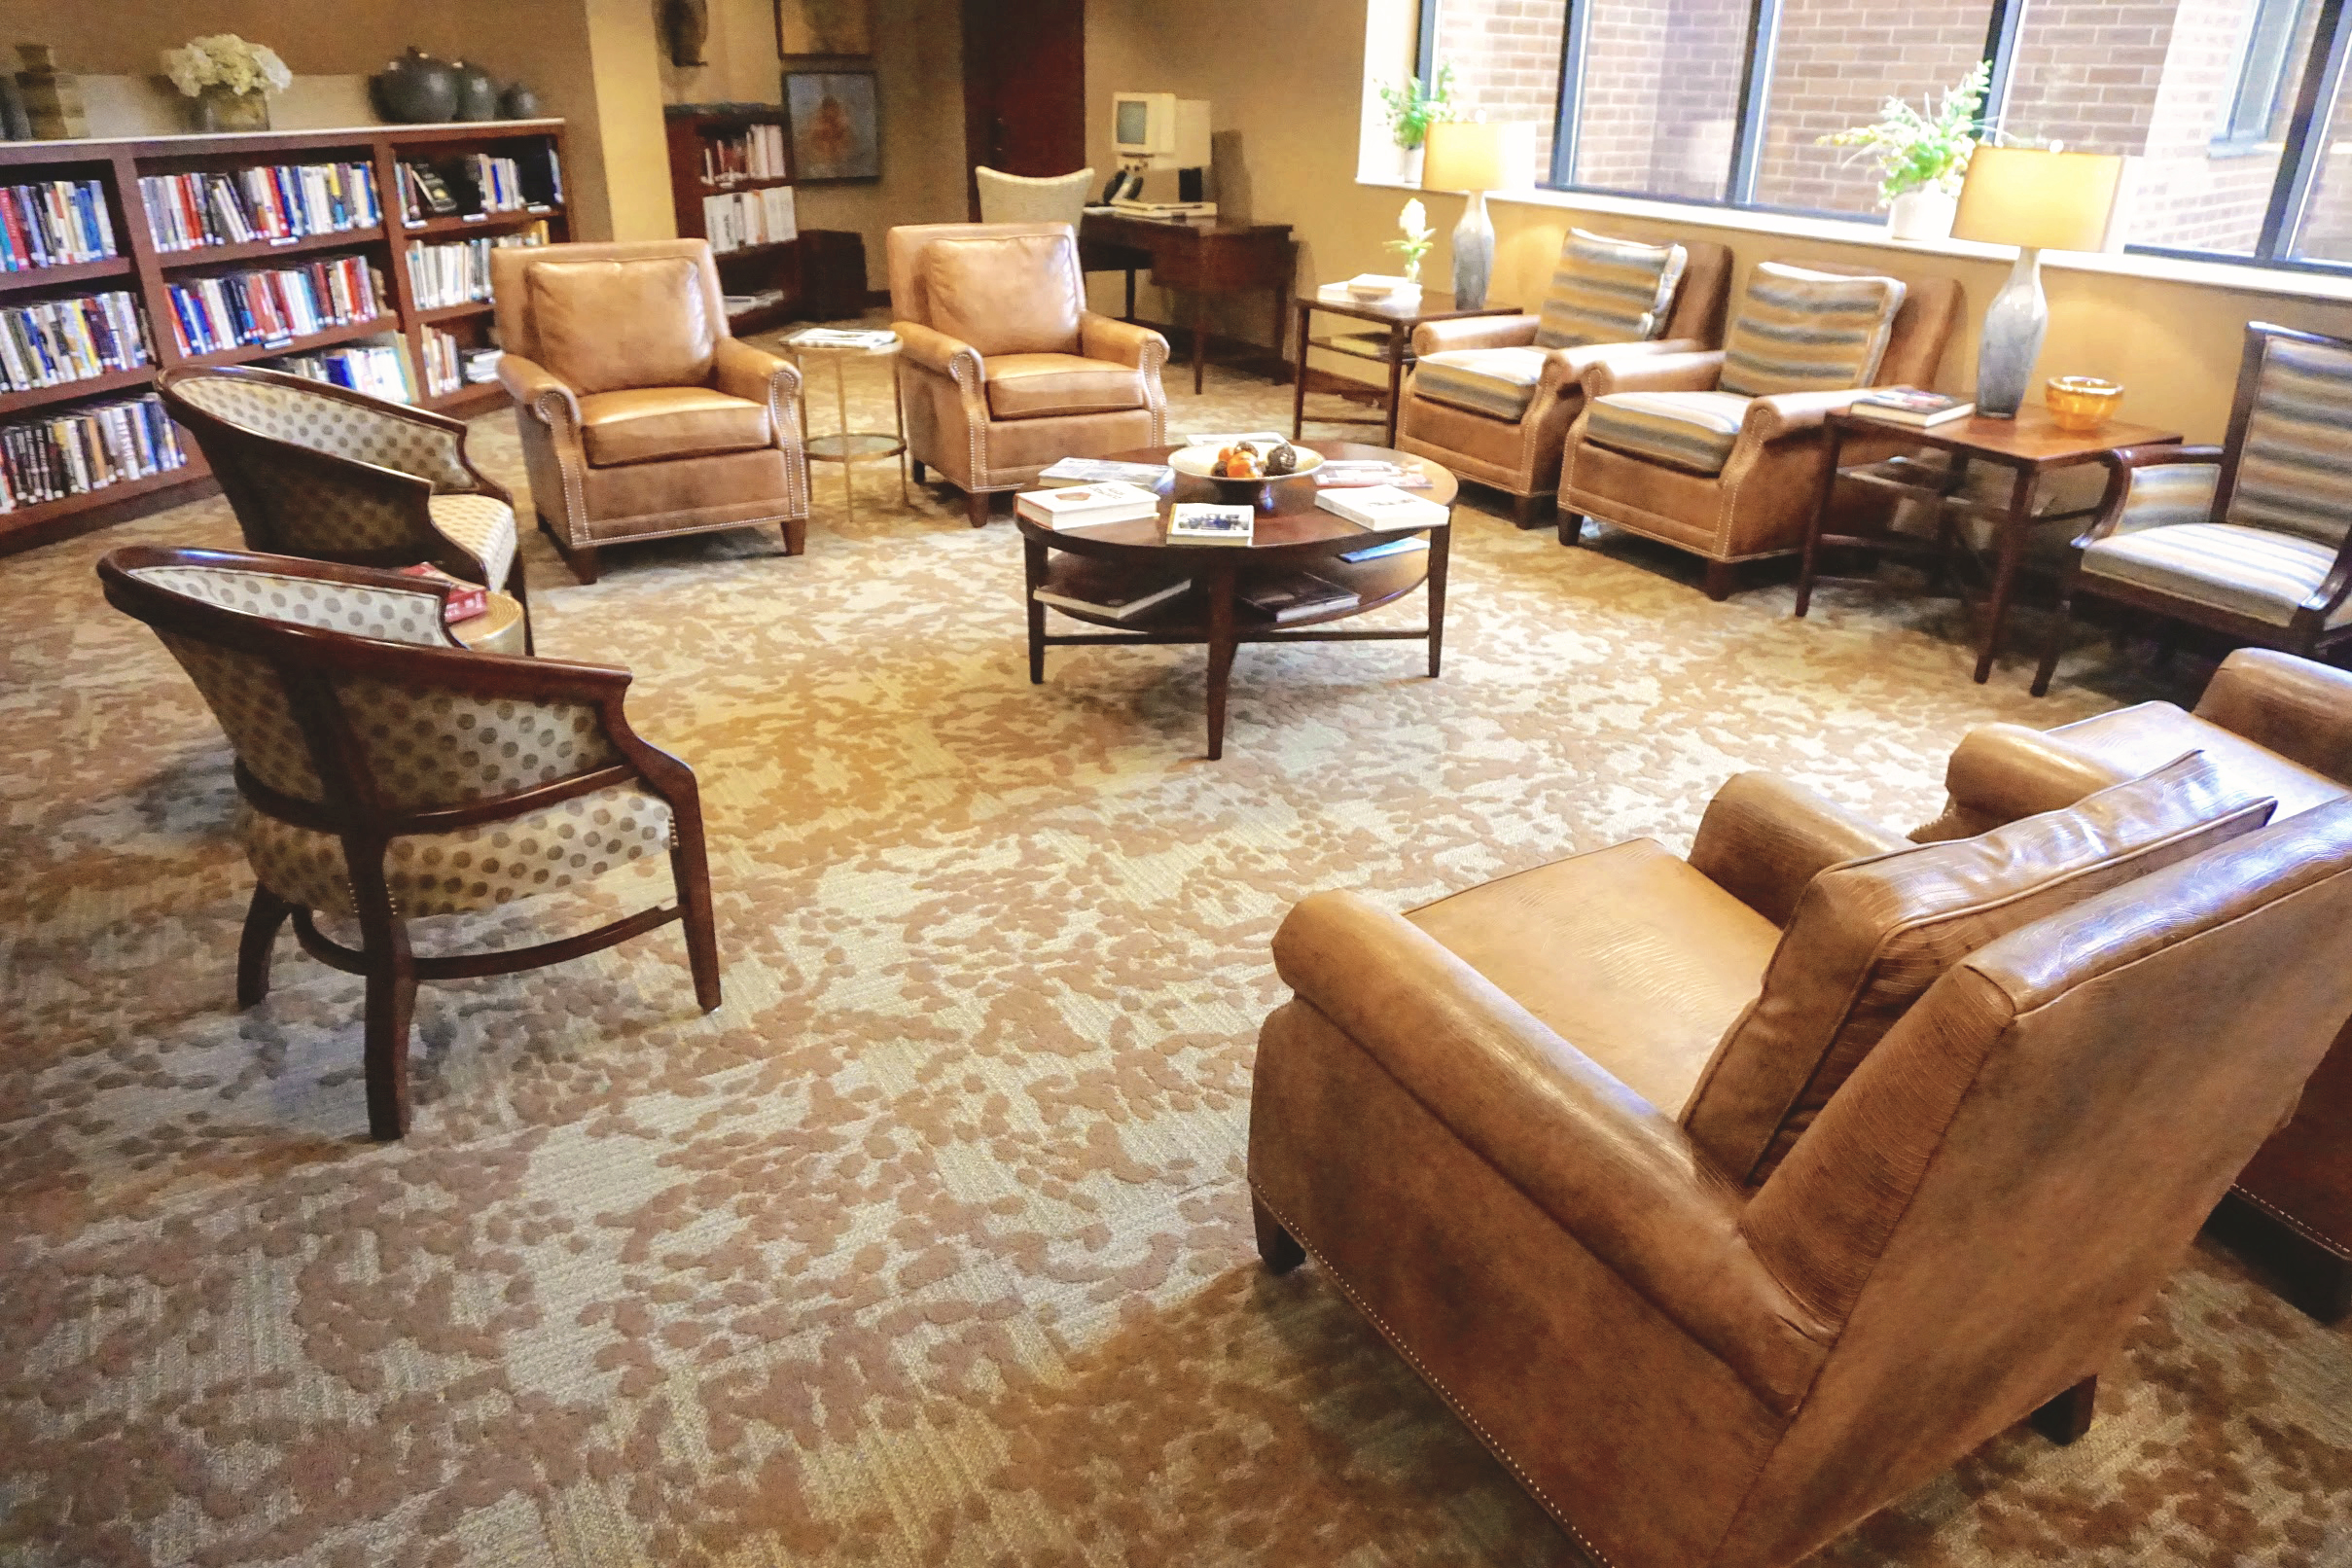 Westwood flooring and carpets